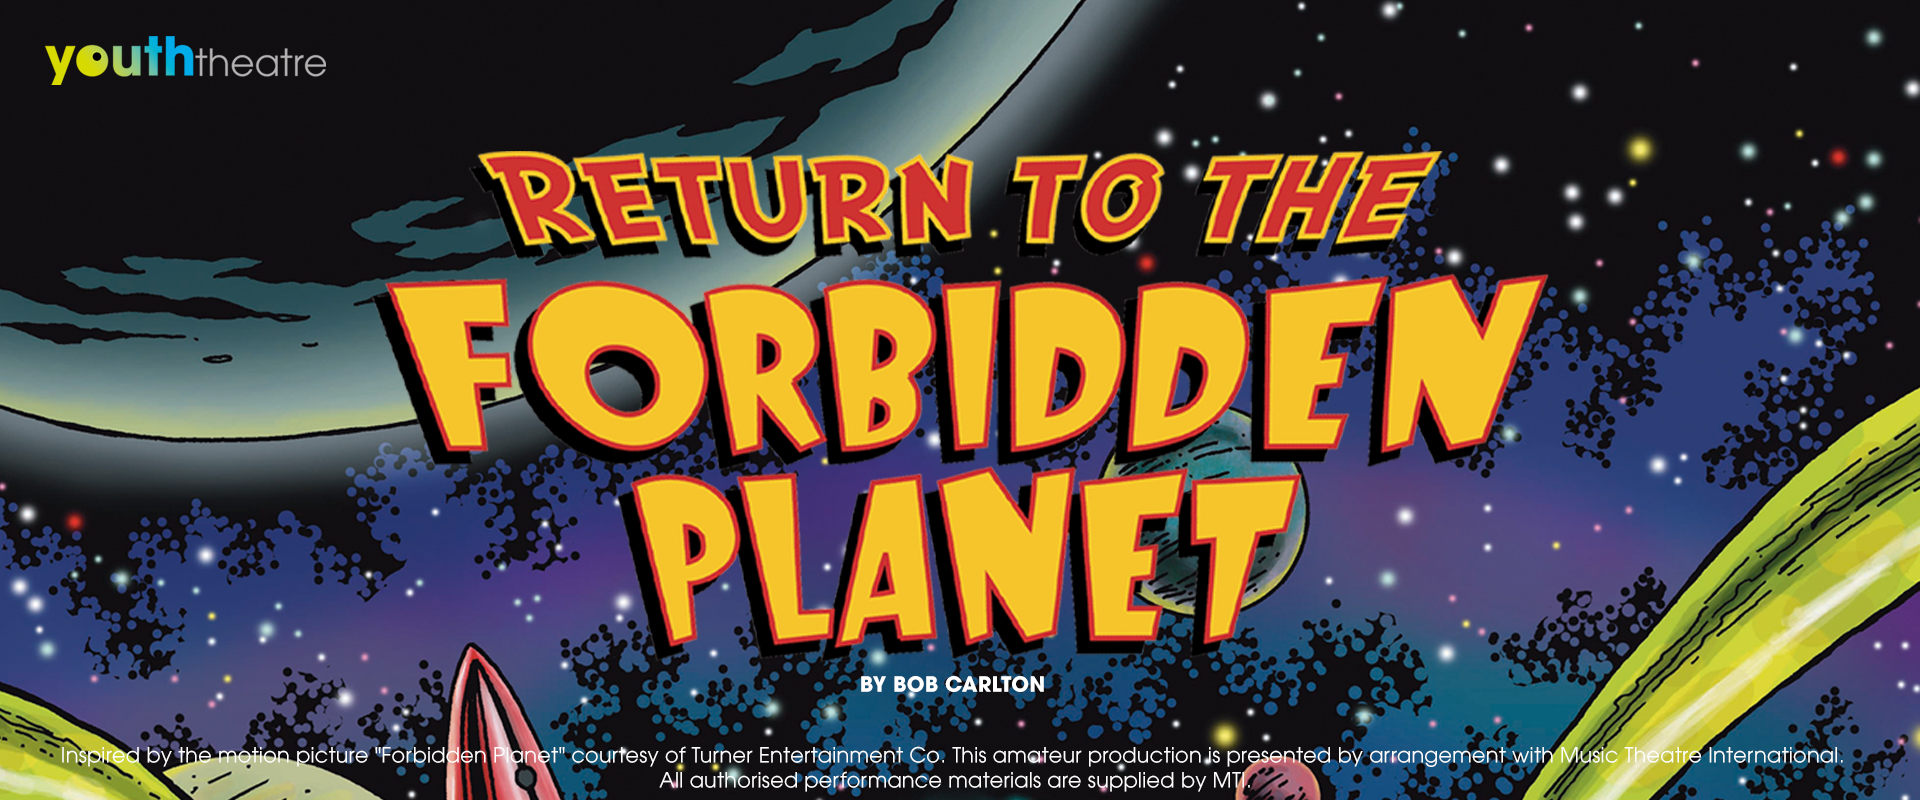 Return to The Forbidden Planet